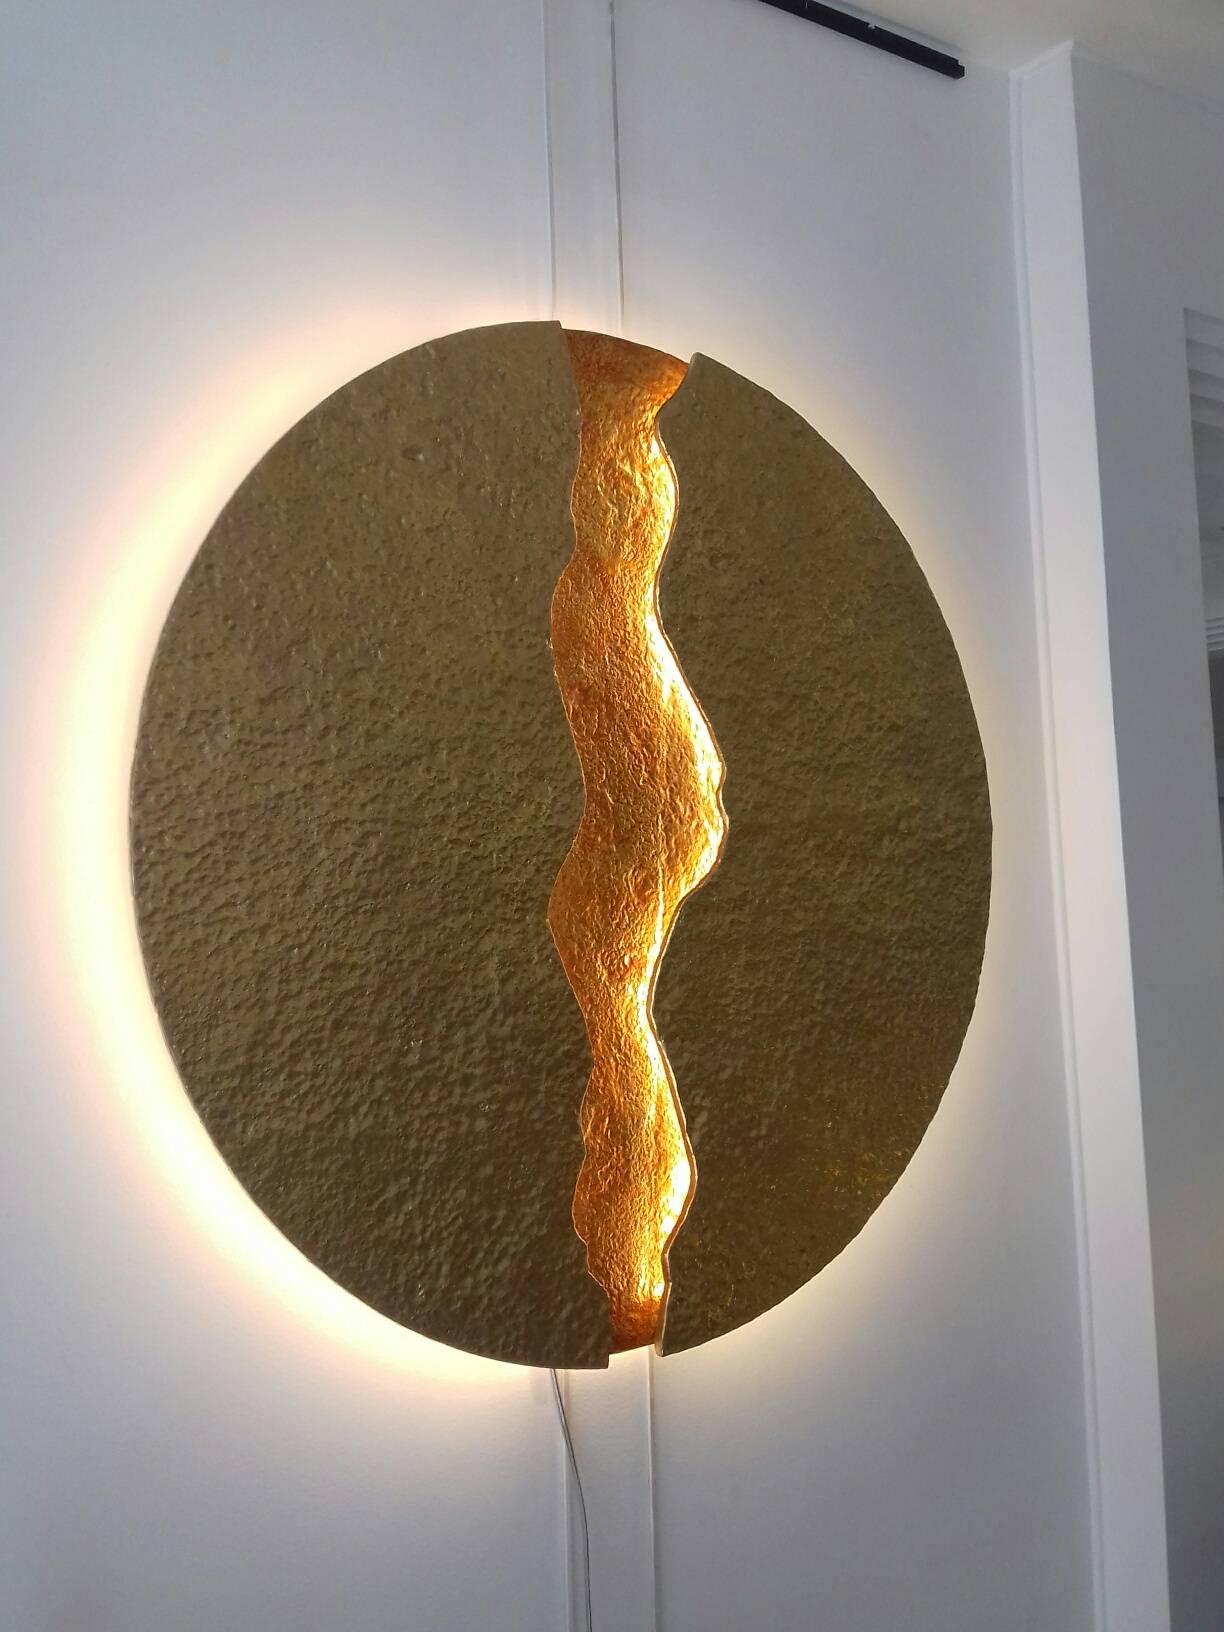 Round wall light, simulating a volcanic lava flow, illuminated on each side of the crack and all around the circle by leds. Double patina gold and orange.